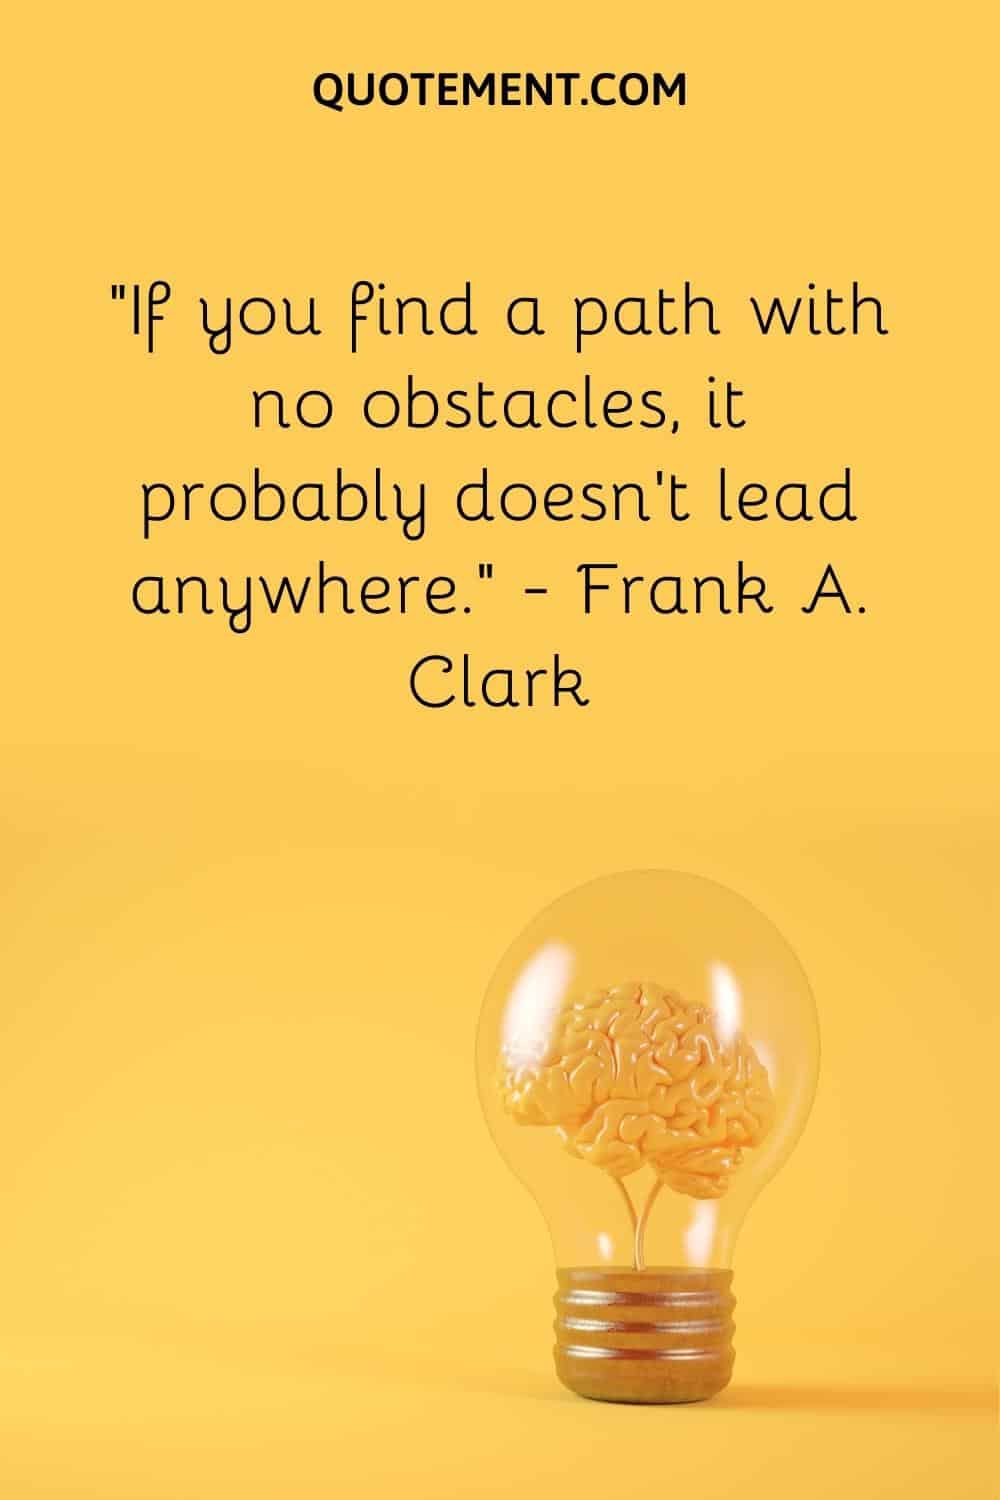 “If you find a path with no obstacles, it probably doesn’t lead anywhere.” — Frank A. Clark